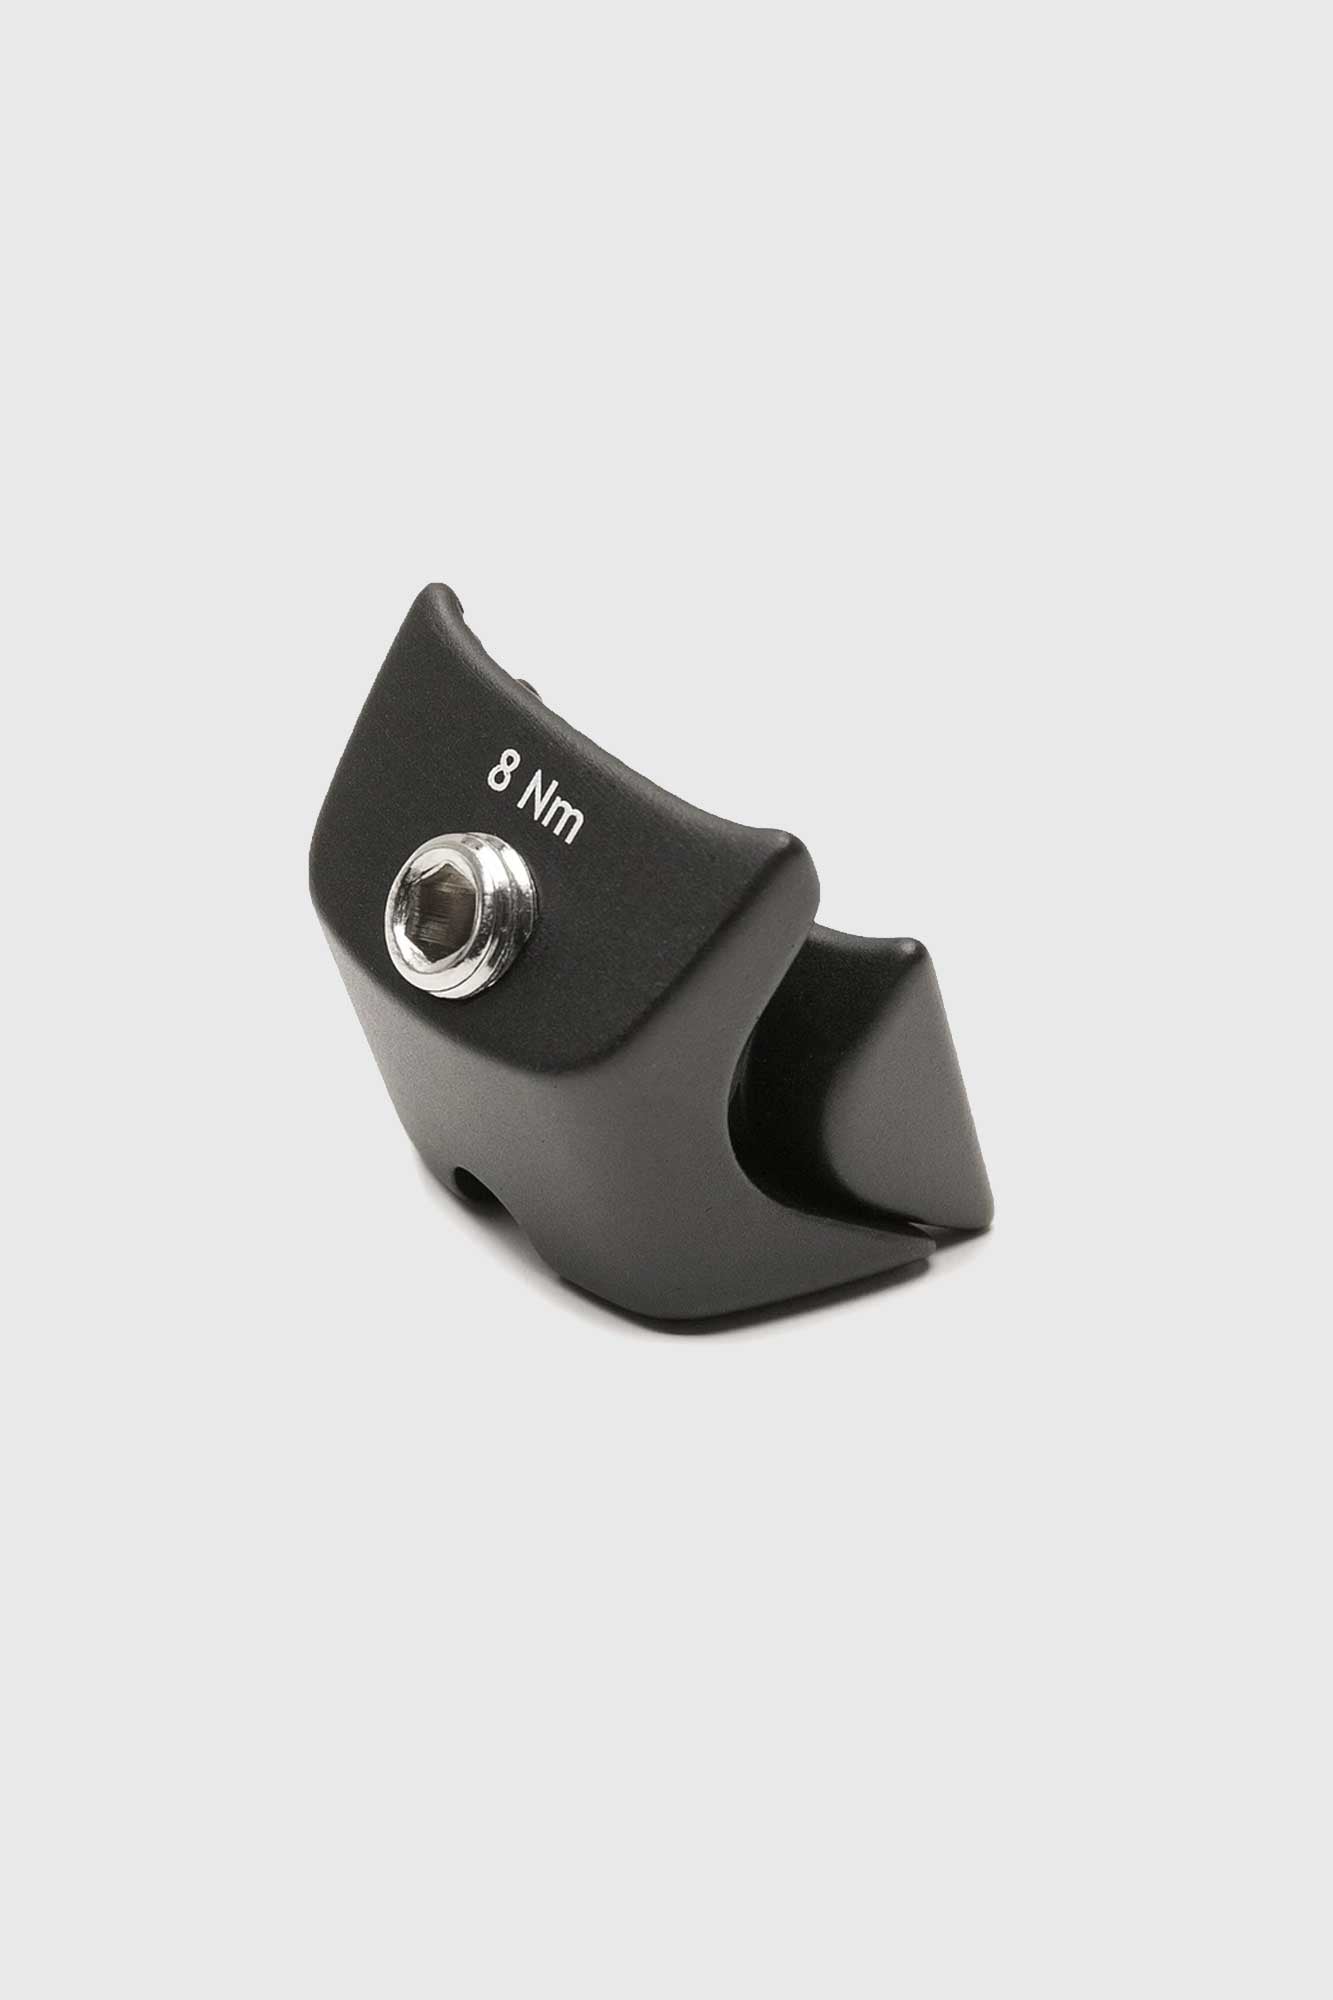 Cervélo SEAT POST CLAMP FOR R5, SIZES 54-61